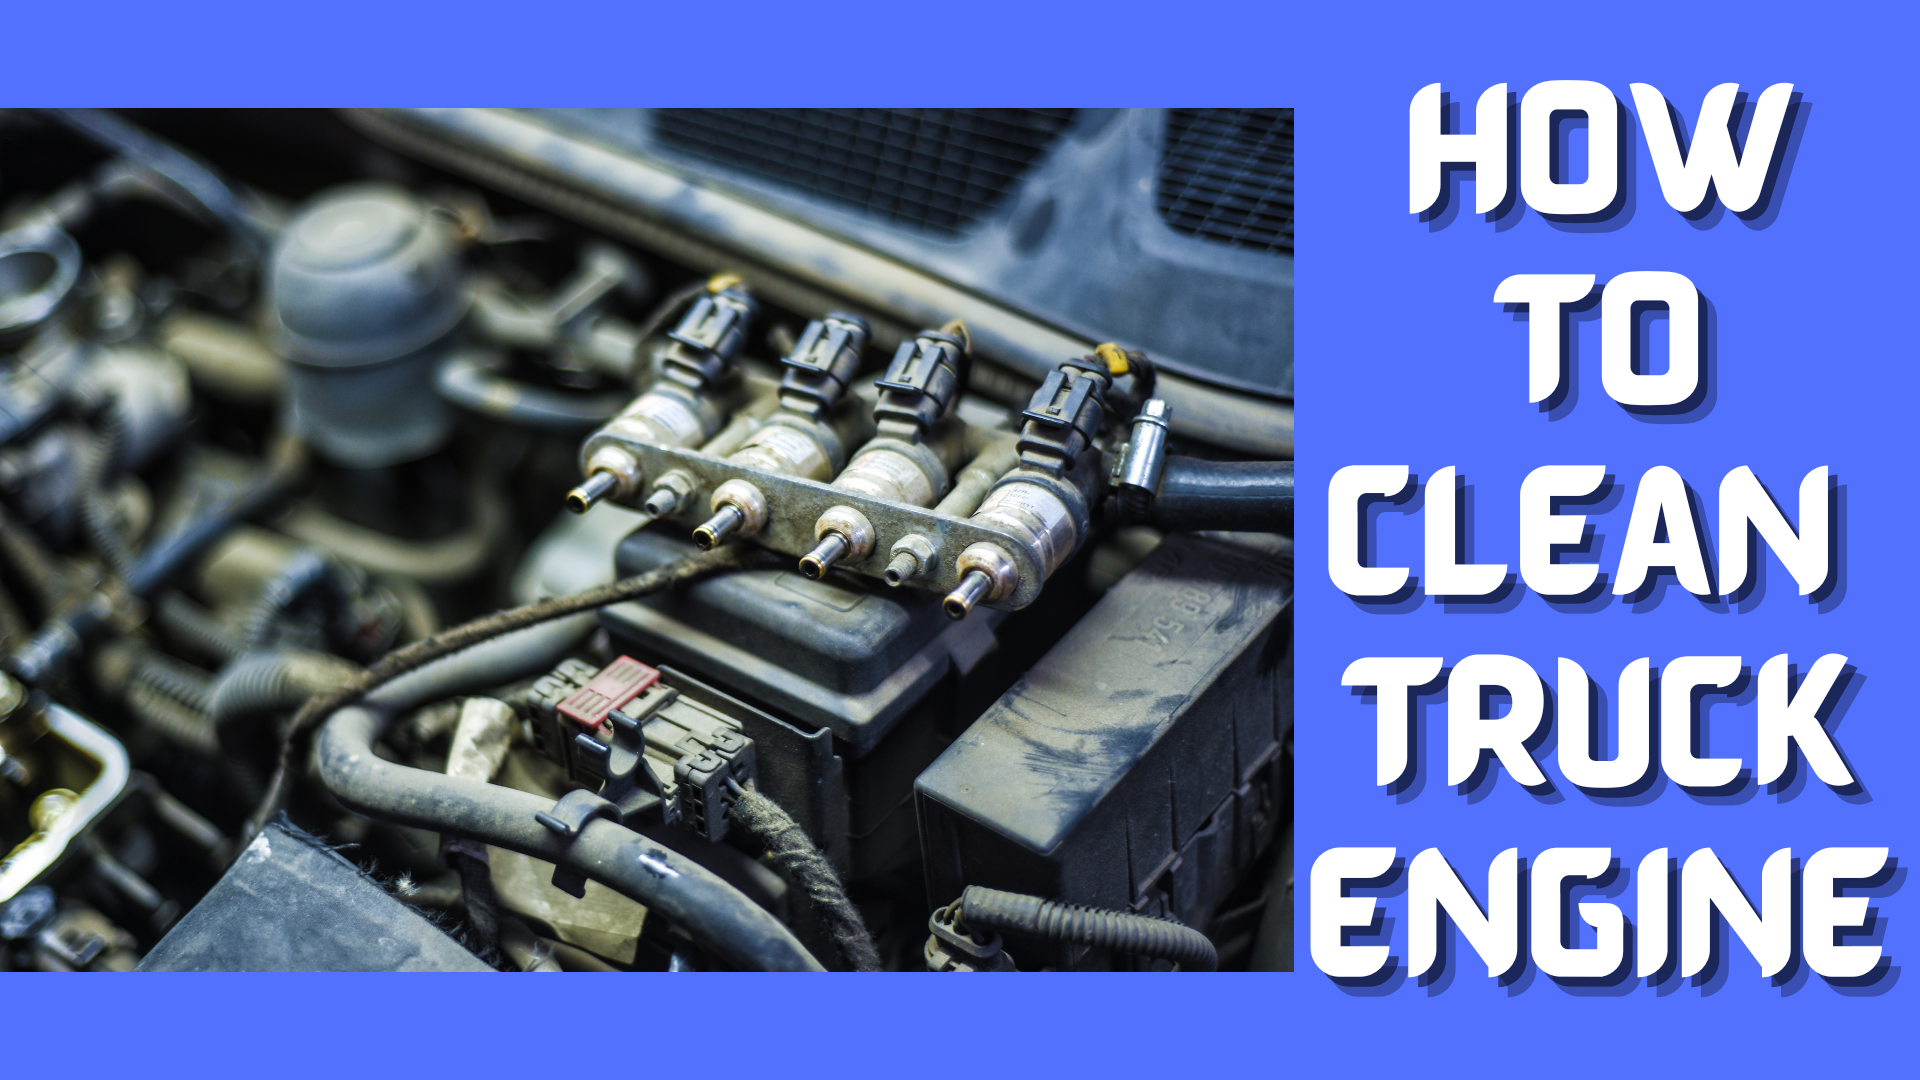 How To Safely Clean Your Truck Engine